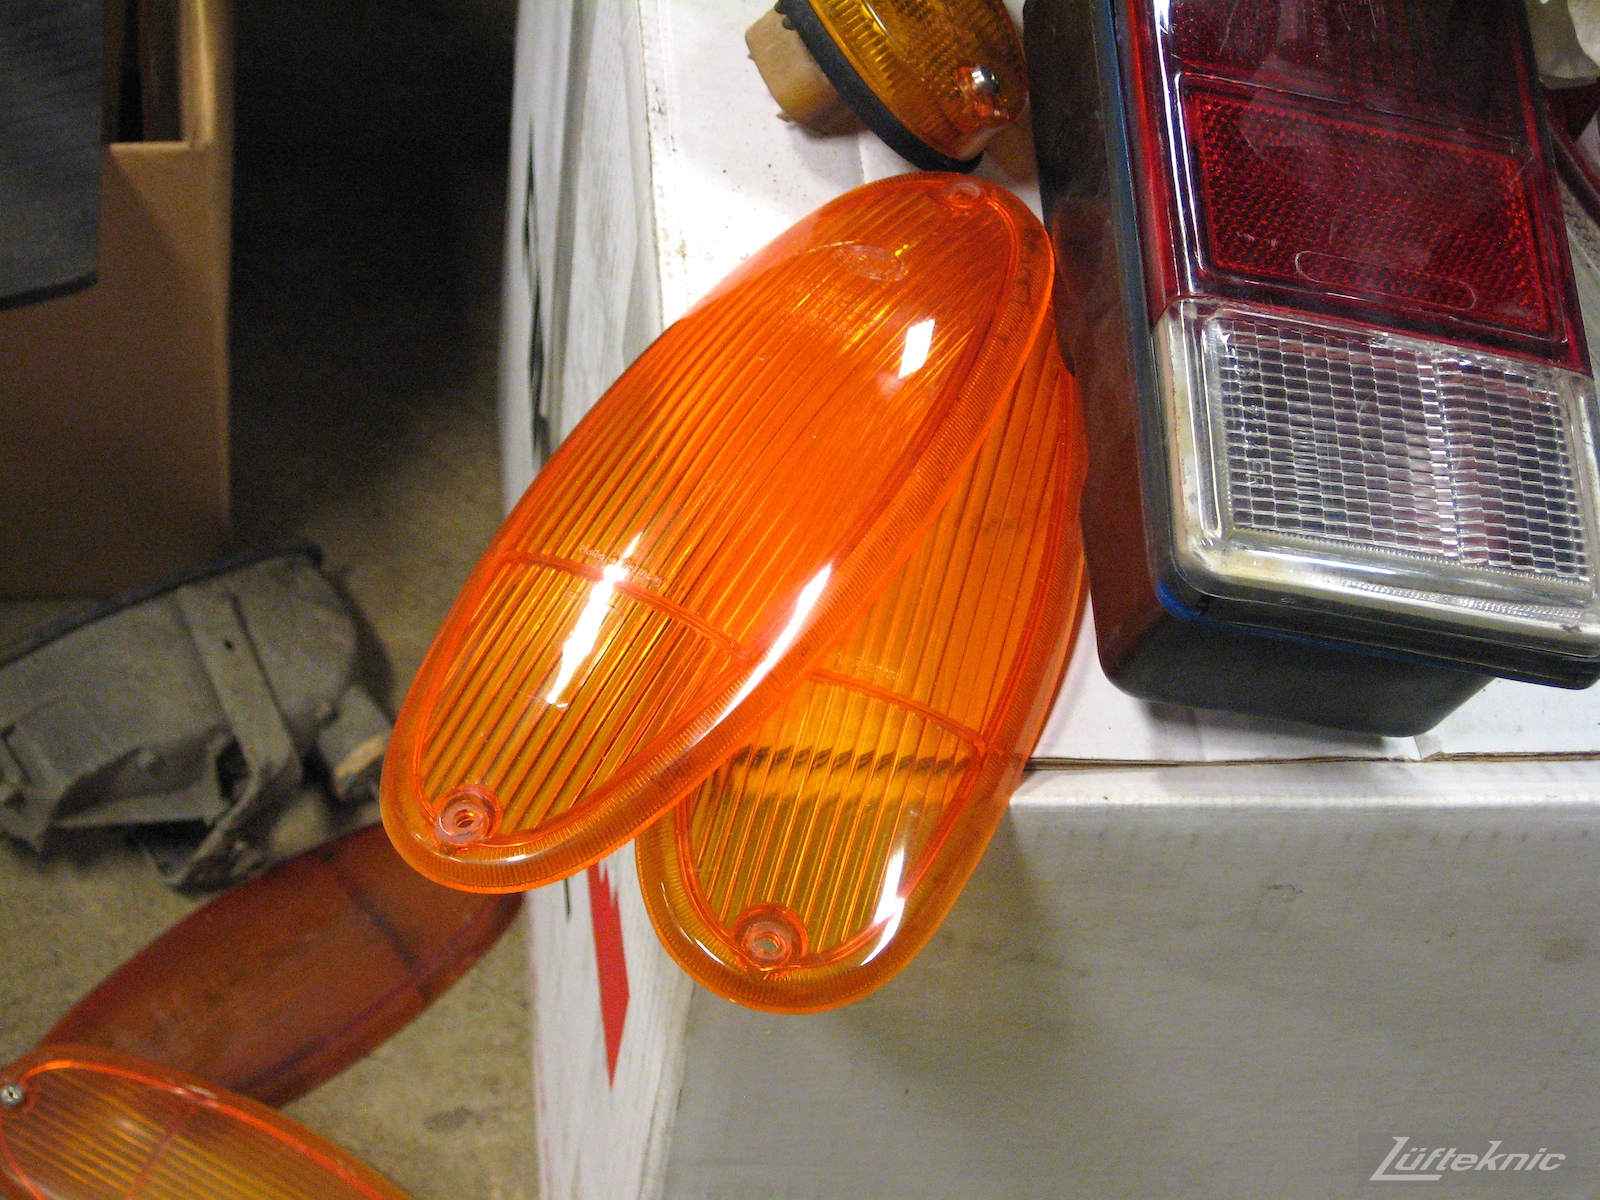 Detailed picture of fresh 914 lights prior to install on a car being restored by Lufteknic.